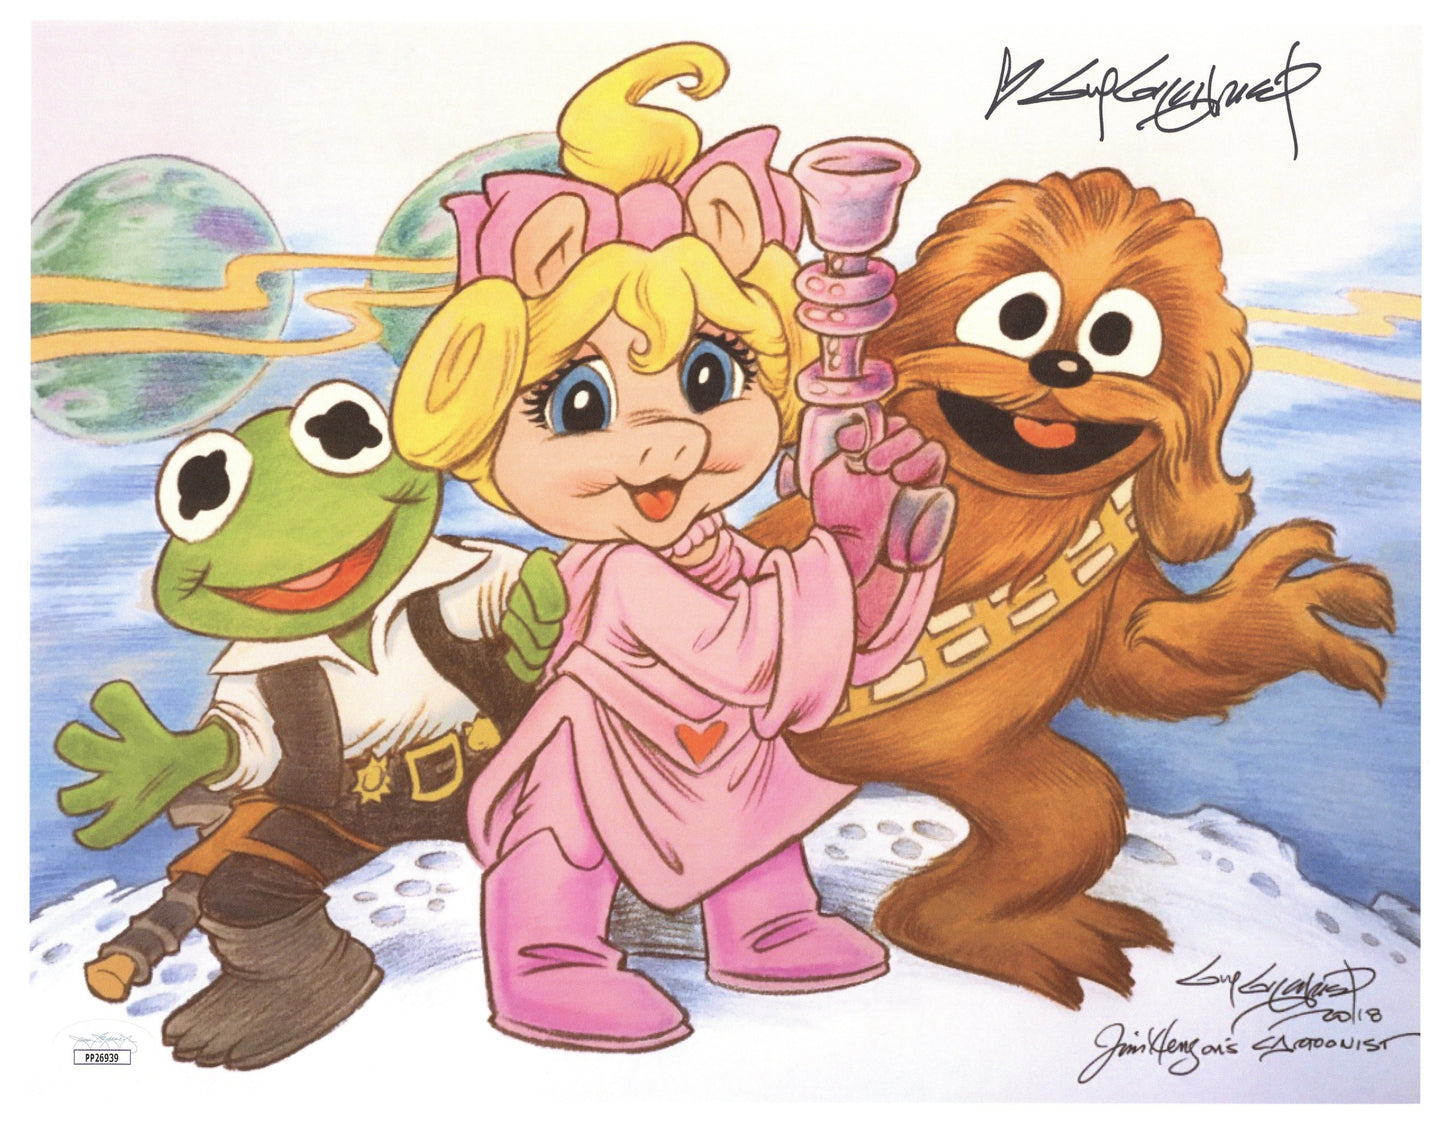 Muppet Babies Star Wars 11x14 Art Print - Created by & Signed by Guy Gilchrist - Includes JSA COA